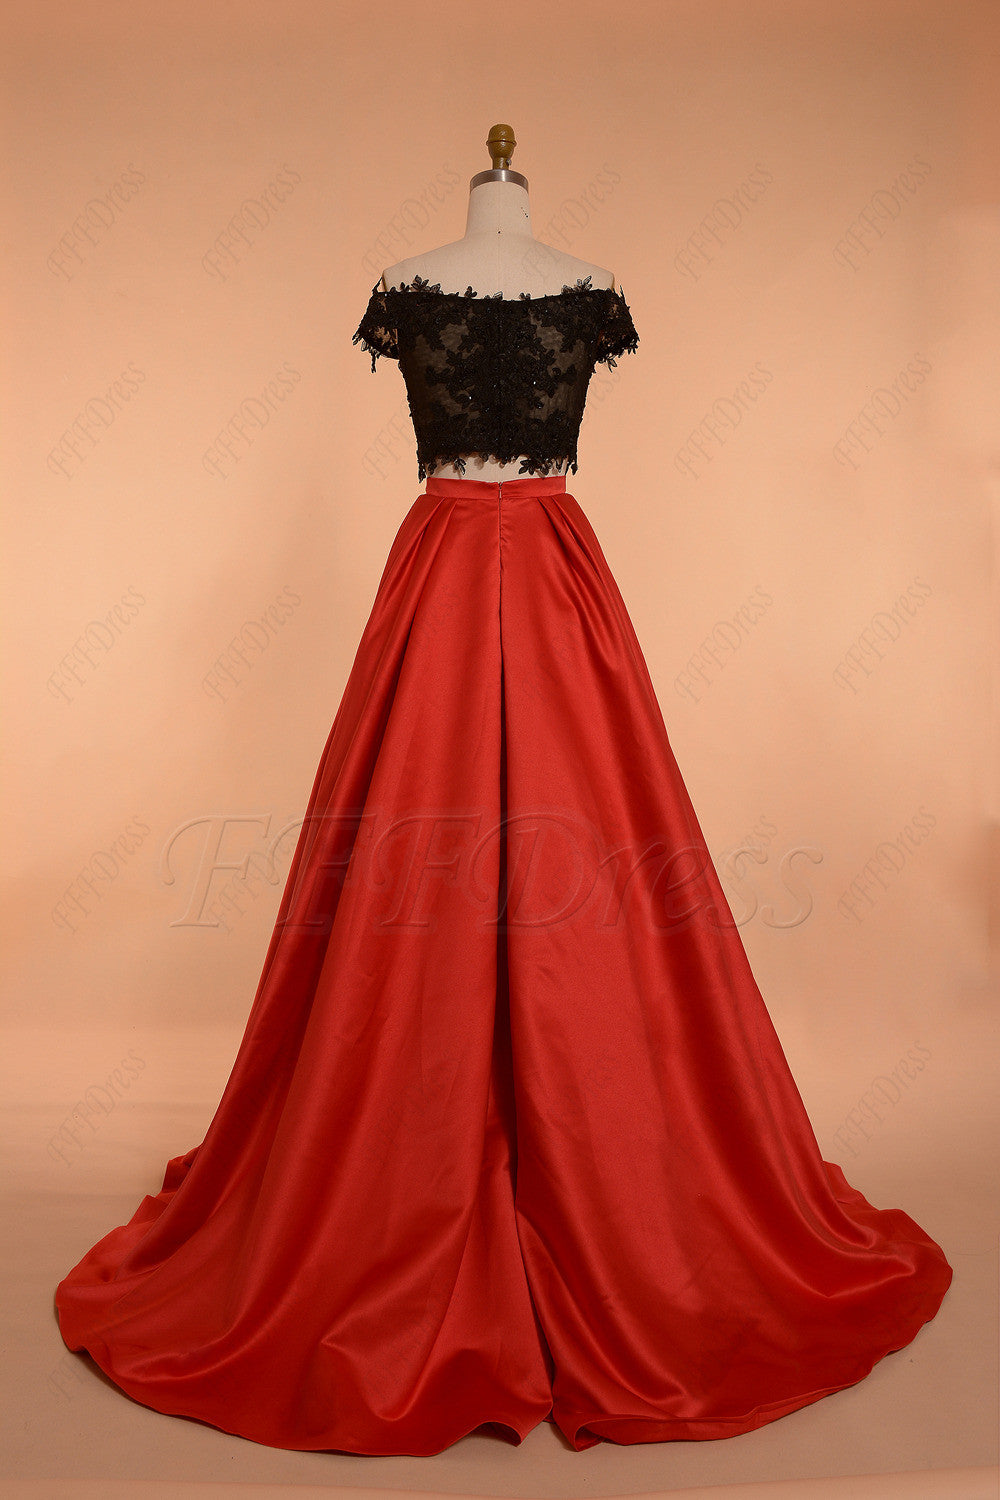 Off the shoulder Two Piece Prom Dress Ball Gown Red Black